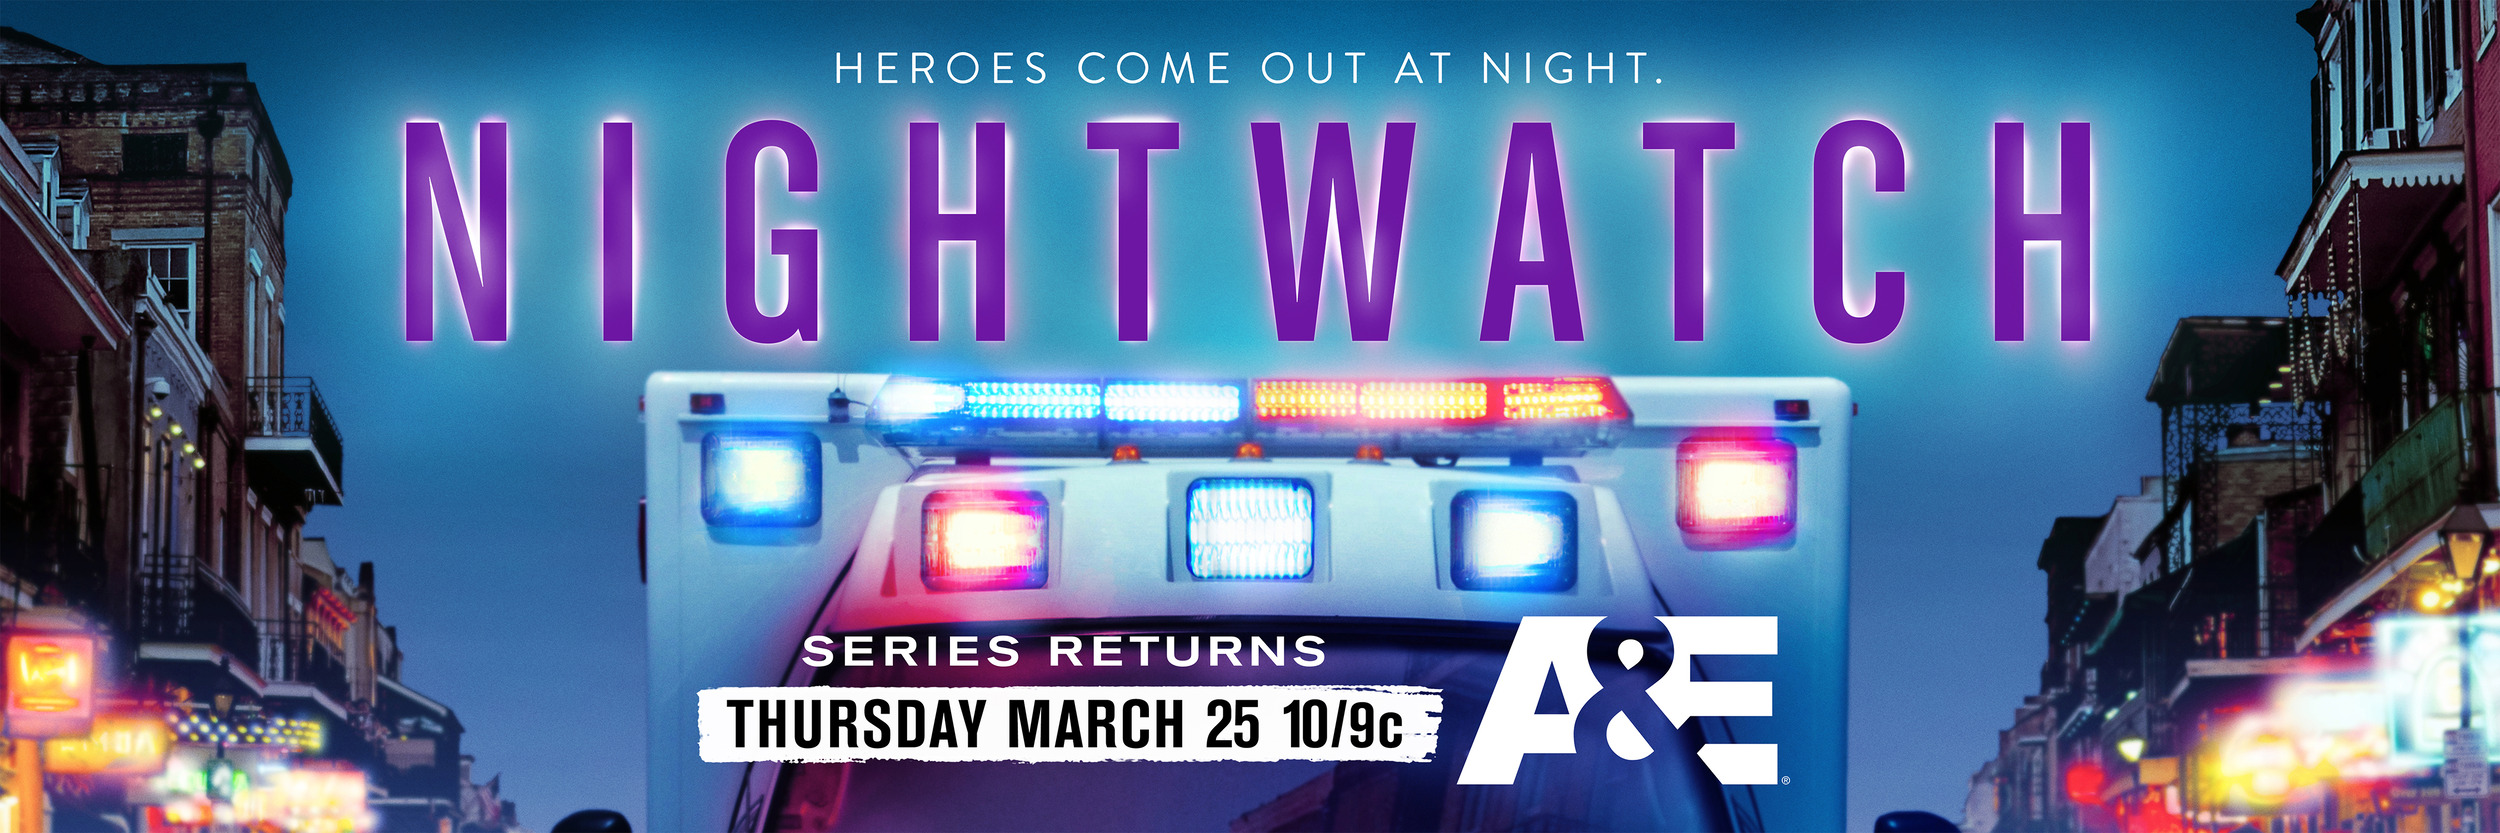 Mega Sized TV Poster Image for Nightwatch (#2 of 3)